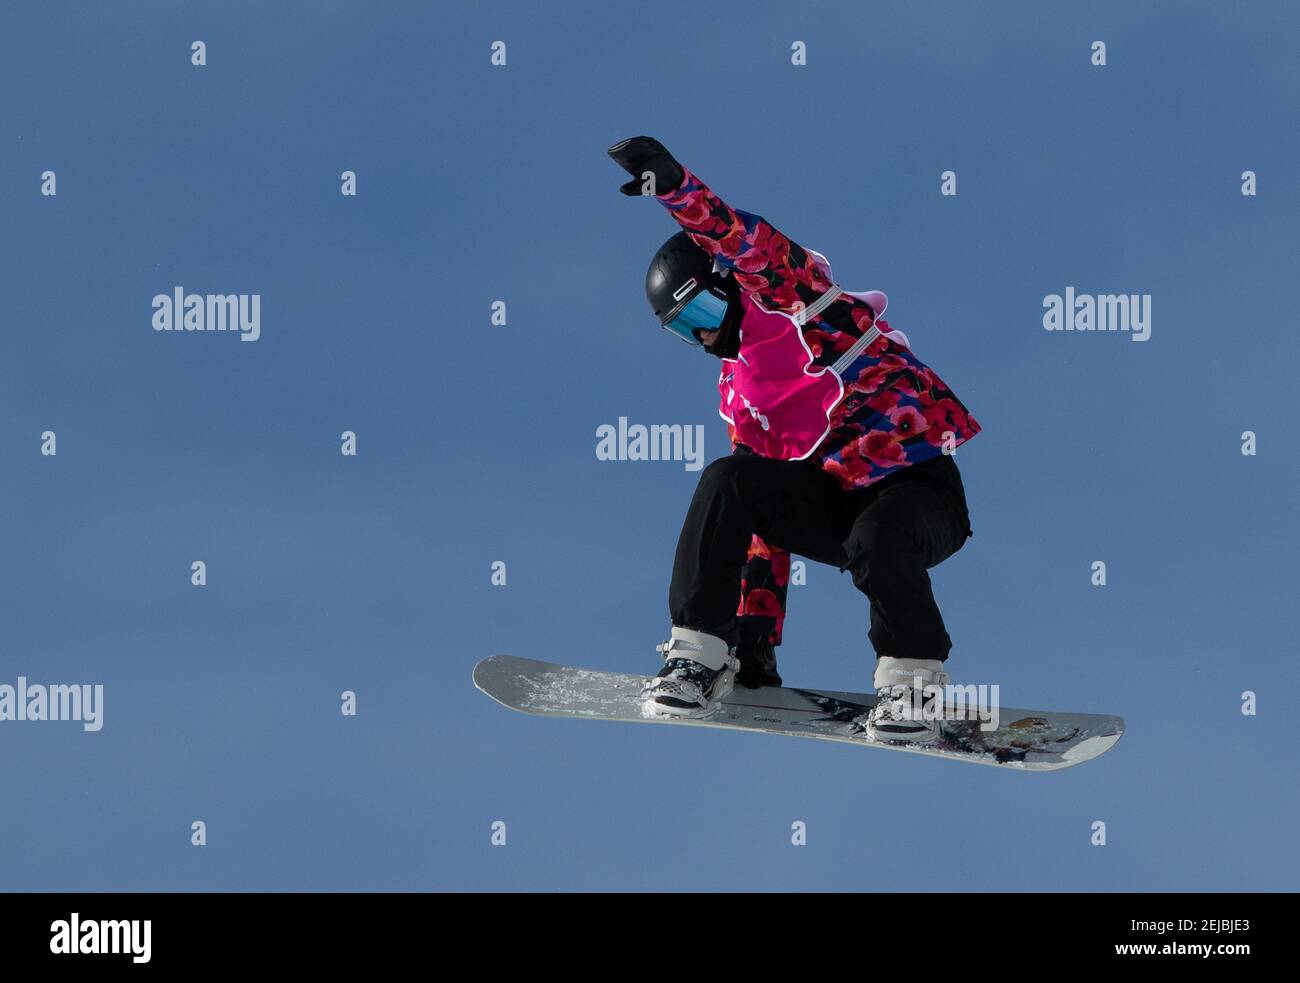 Jan 18, 2020; Lausanne, SWITZERLAND; Ty Schnorrbusch USA in action during  the Snowboarding Women's Slopestyle at the Leysin Park. The Winter Youth  Olympic Games. Mandatory Credit: Ben Queenborough/OIS Handout Photo via USA